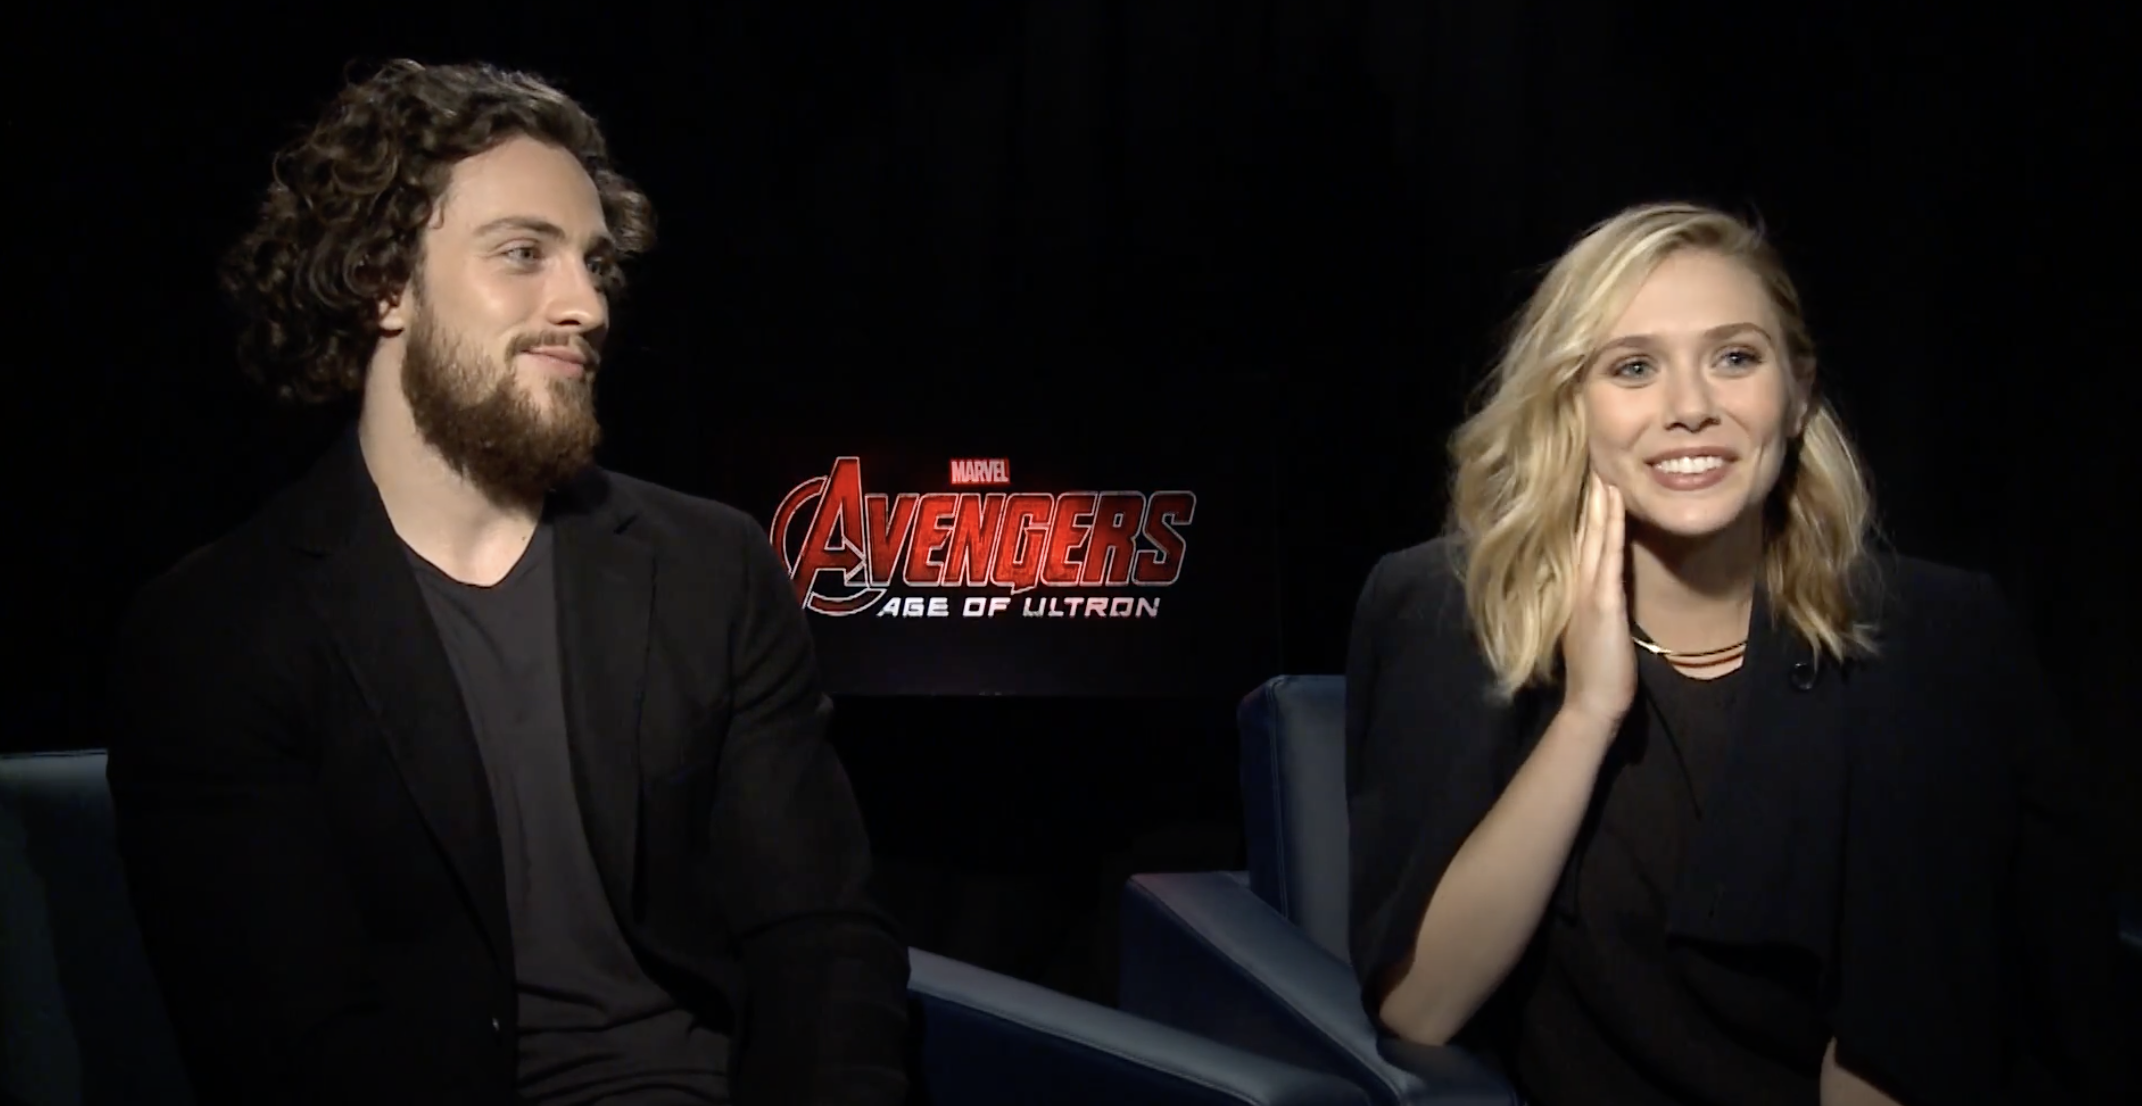 Elizabeth Olsen and Aaron Taylor-Johnson being interviewed about Avengers: Age of Ultron